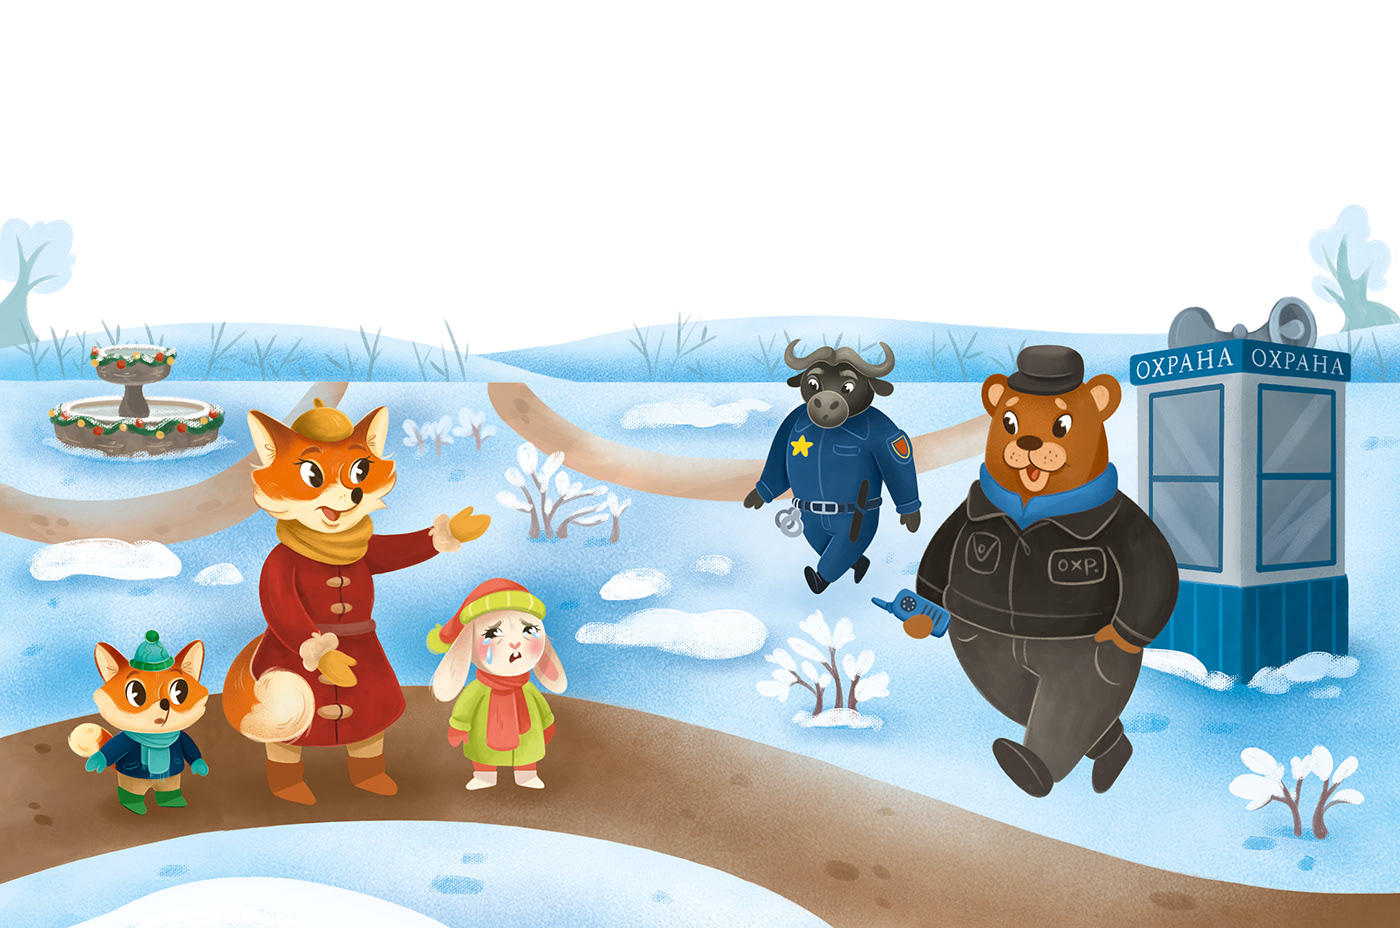 animal illustration cartoon style children's book digital illustration ILLUSTRATION  Illustrator kidlit kidlitart Picture book storybook animal characters bright art cute style Digital Artwork Editorial book educational book for youngsters FOX kids book Playbook preschool education textured winter art with stickers